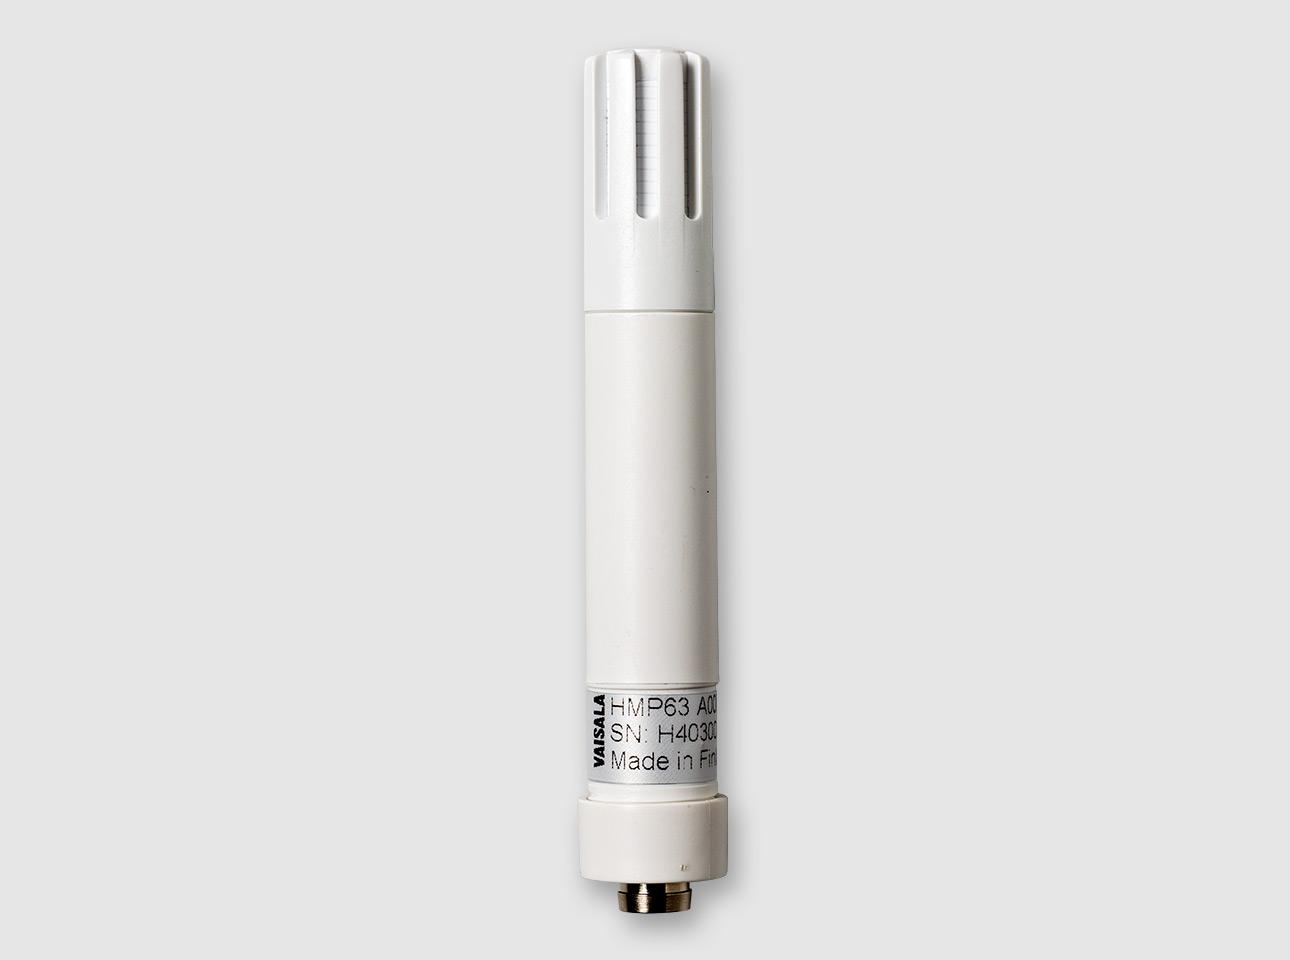 The Vaisala INTERCAP® Humidity and Temperature Probe HMP63 is a cost-effective humidity probe with plastic enclosure.